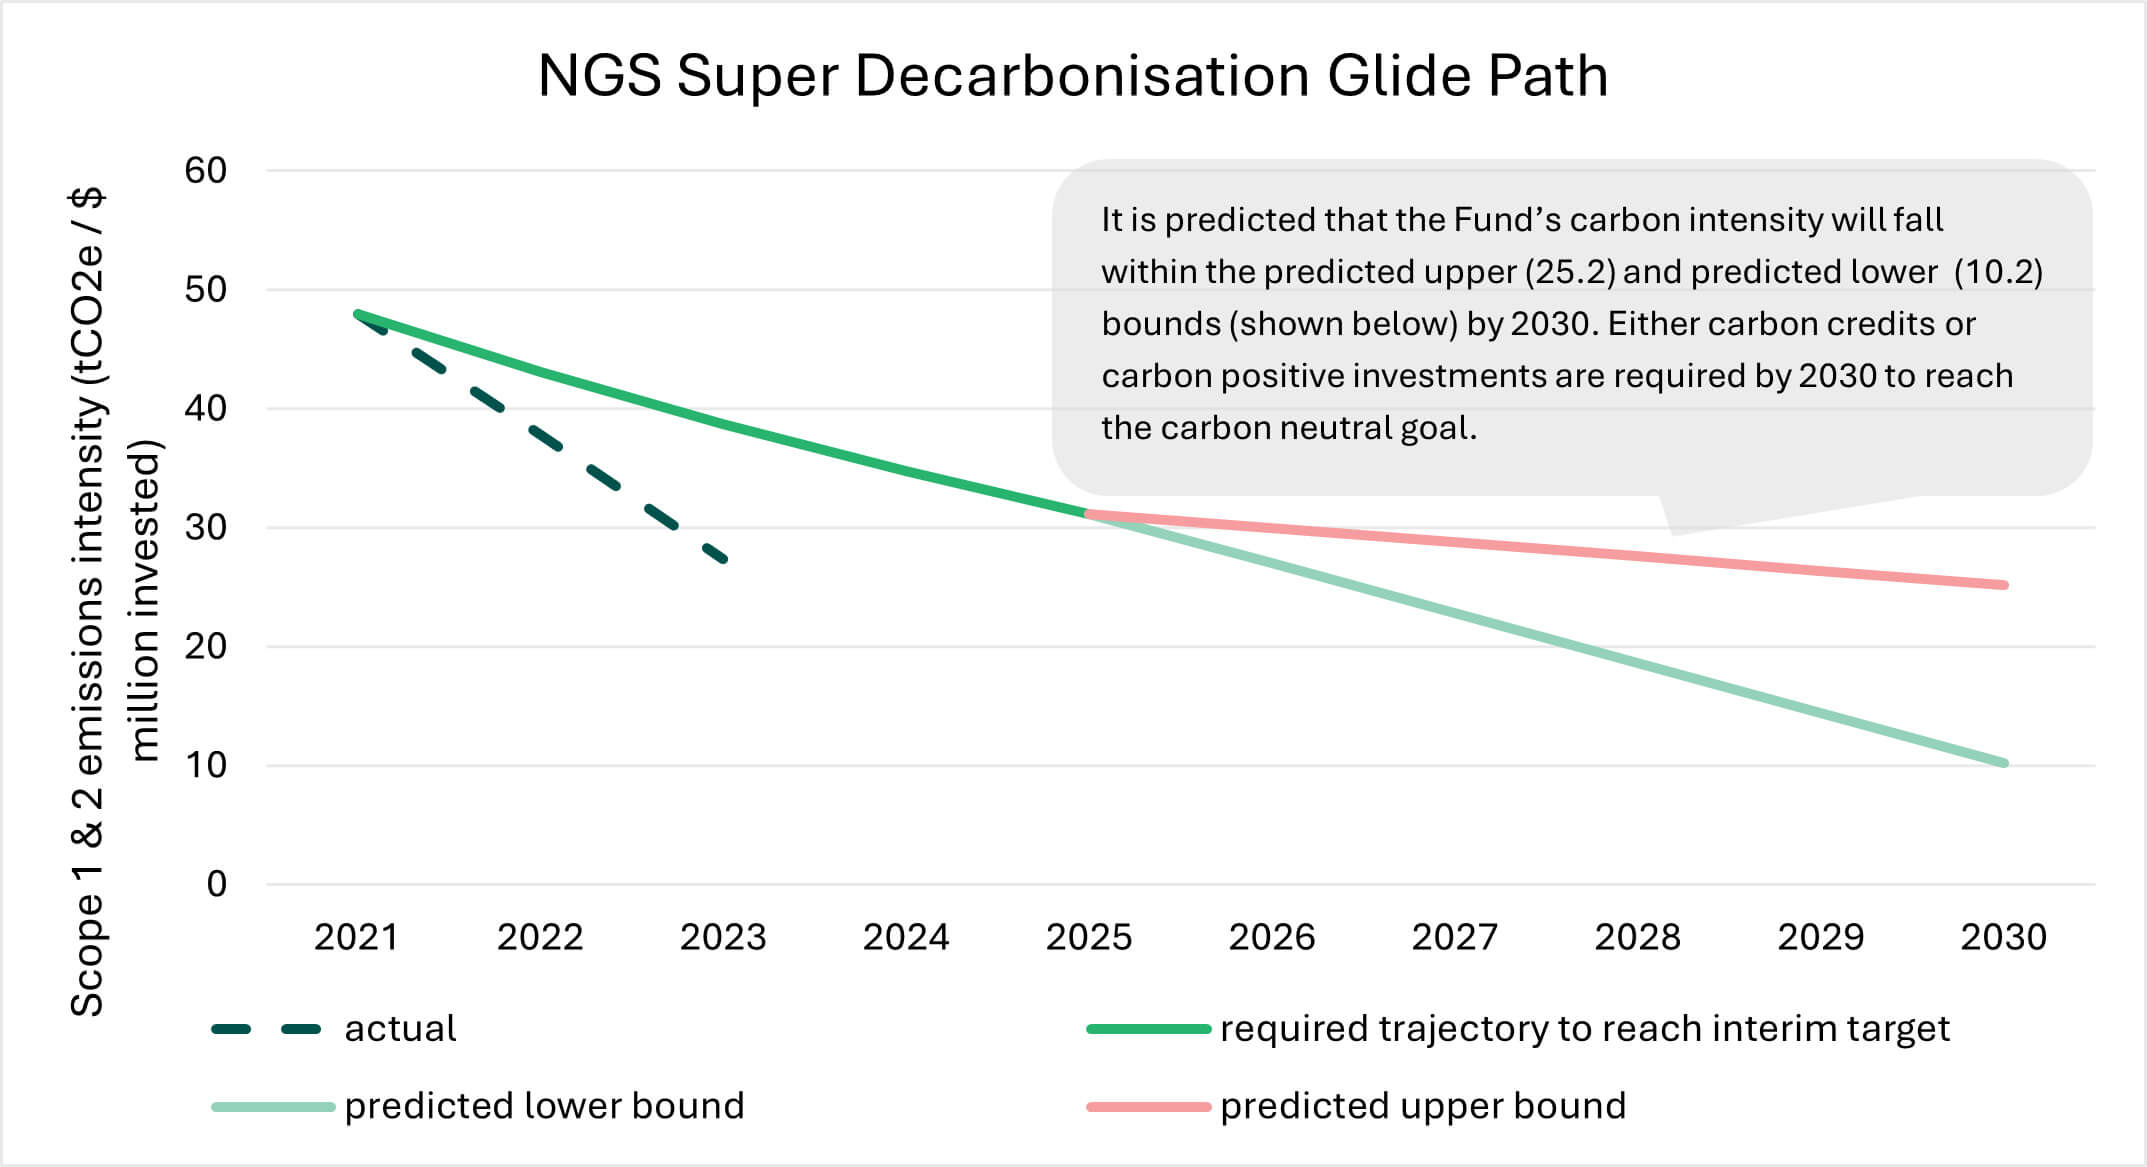 NGS Super decarbonisation glide path